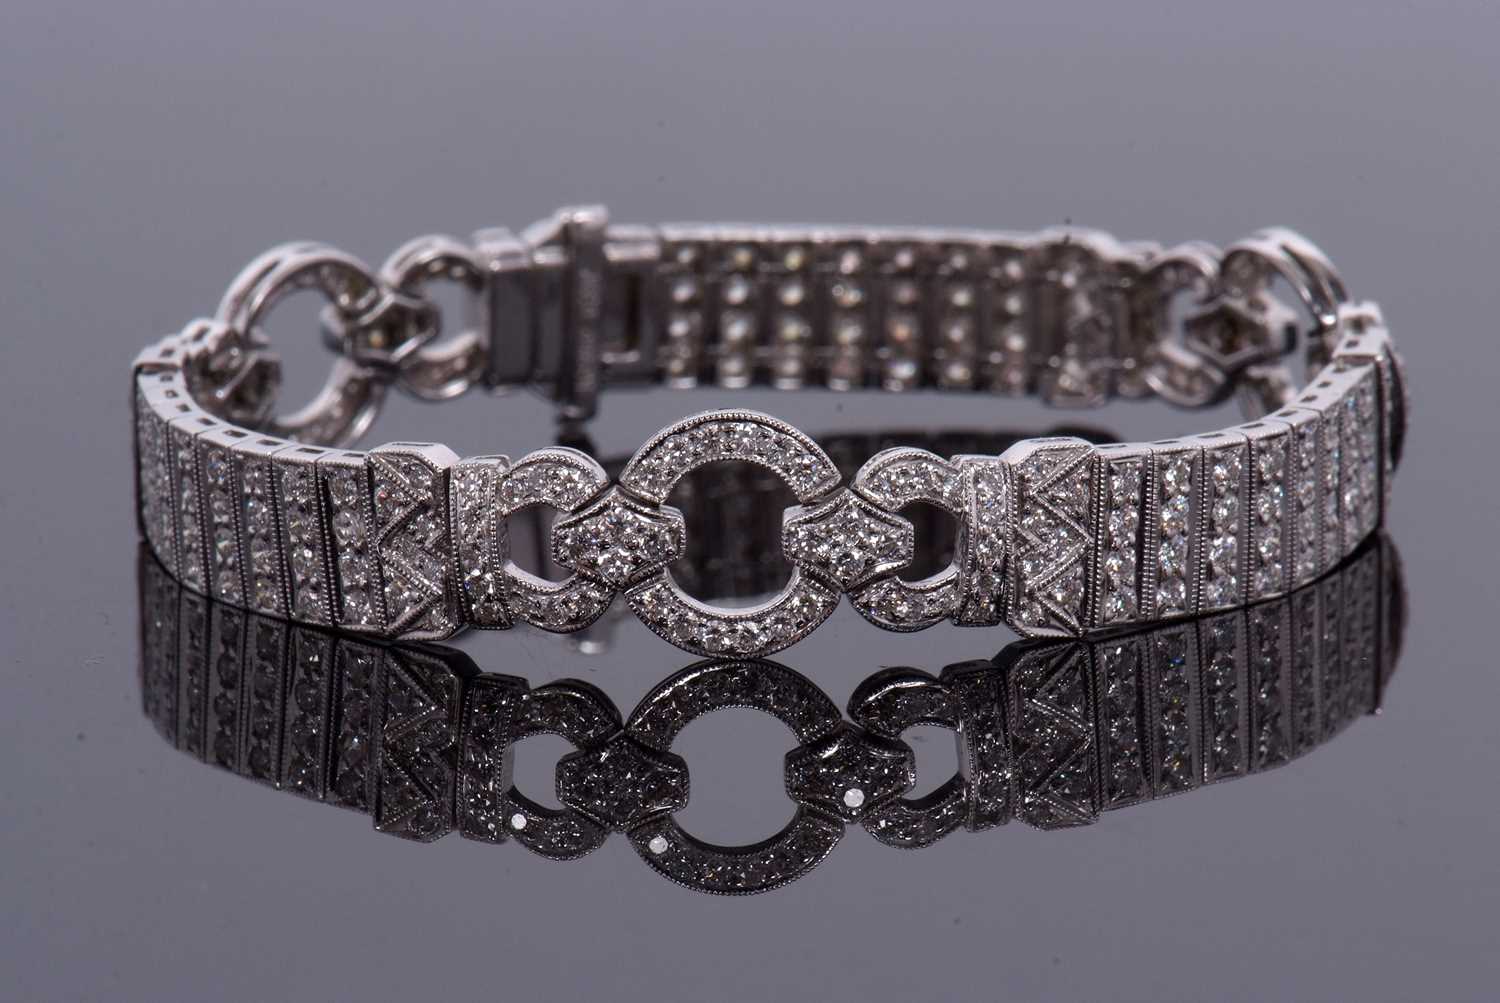 An 18ct white gold and diamond Art Deco style bracelet, comprised of three circlets of small round